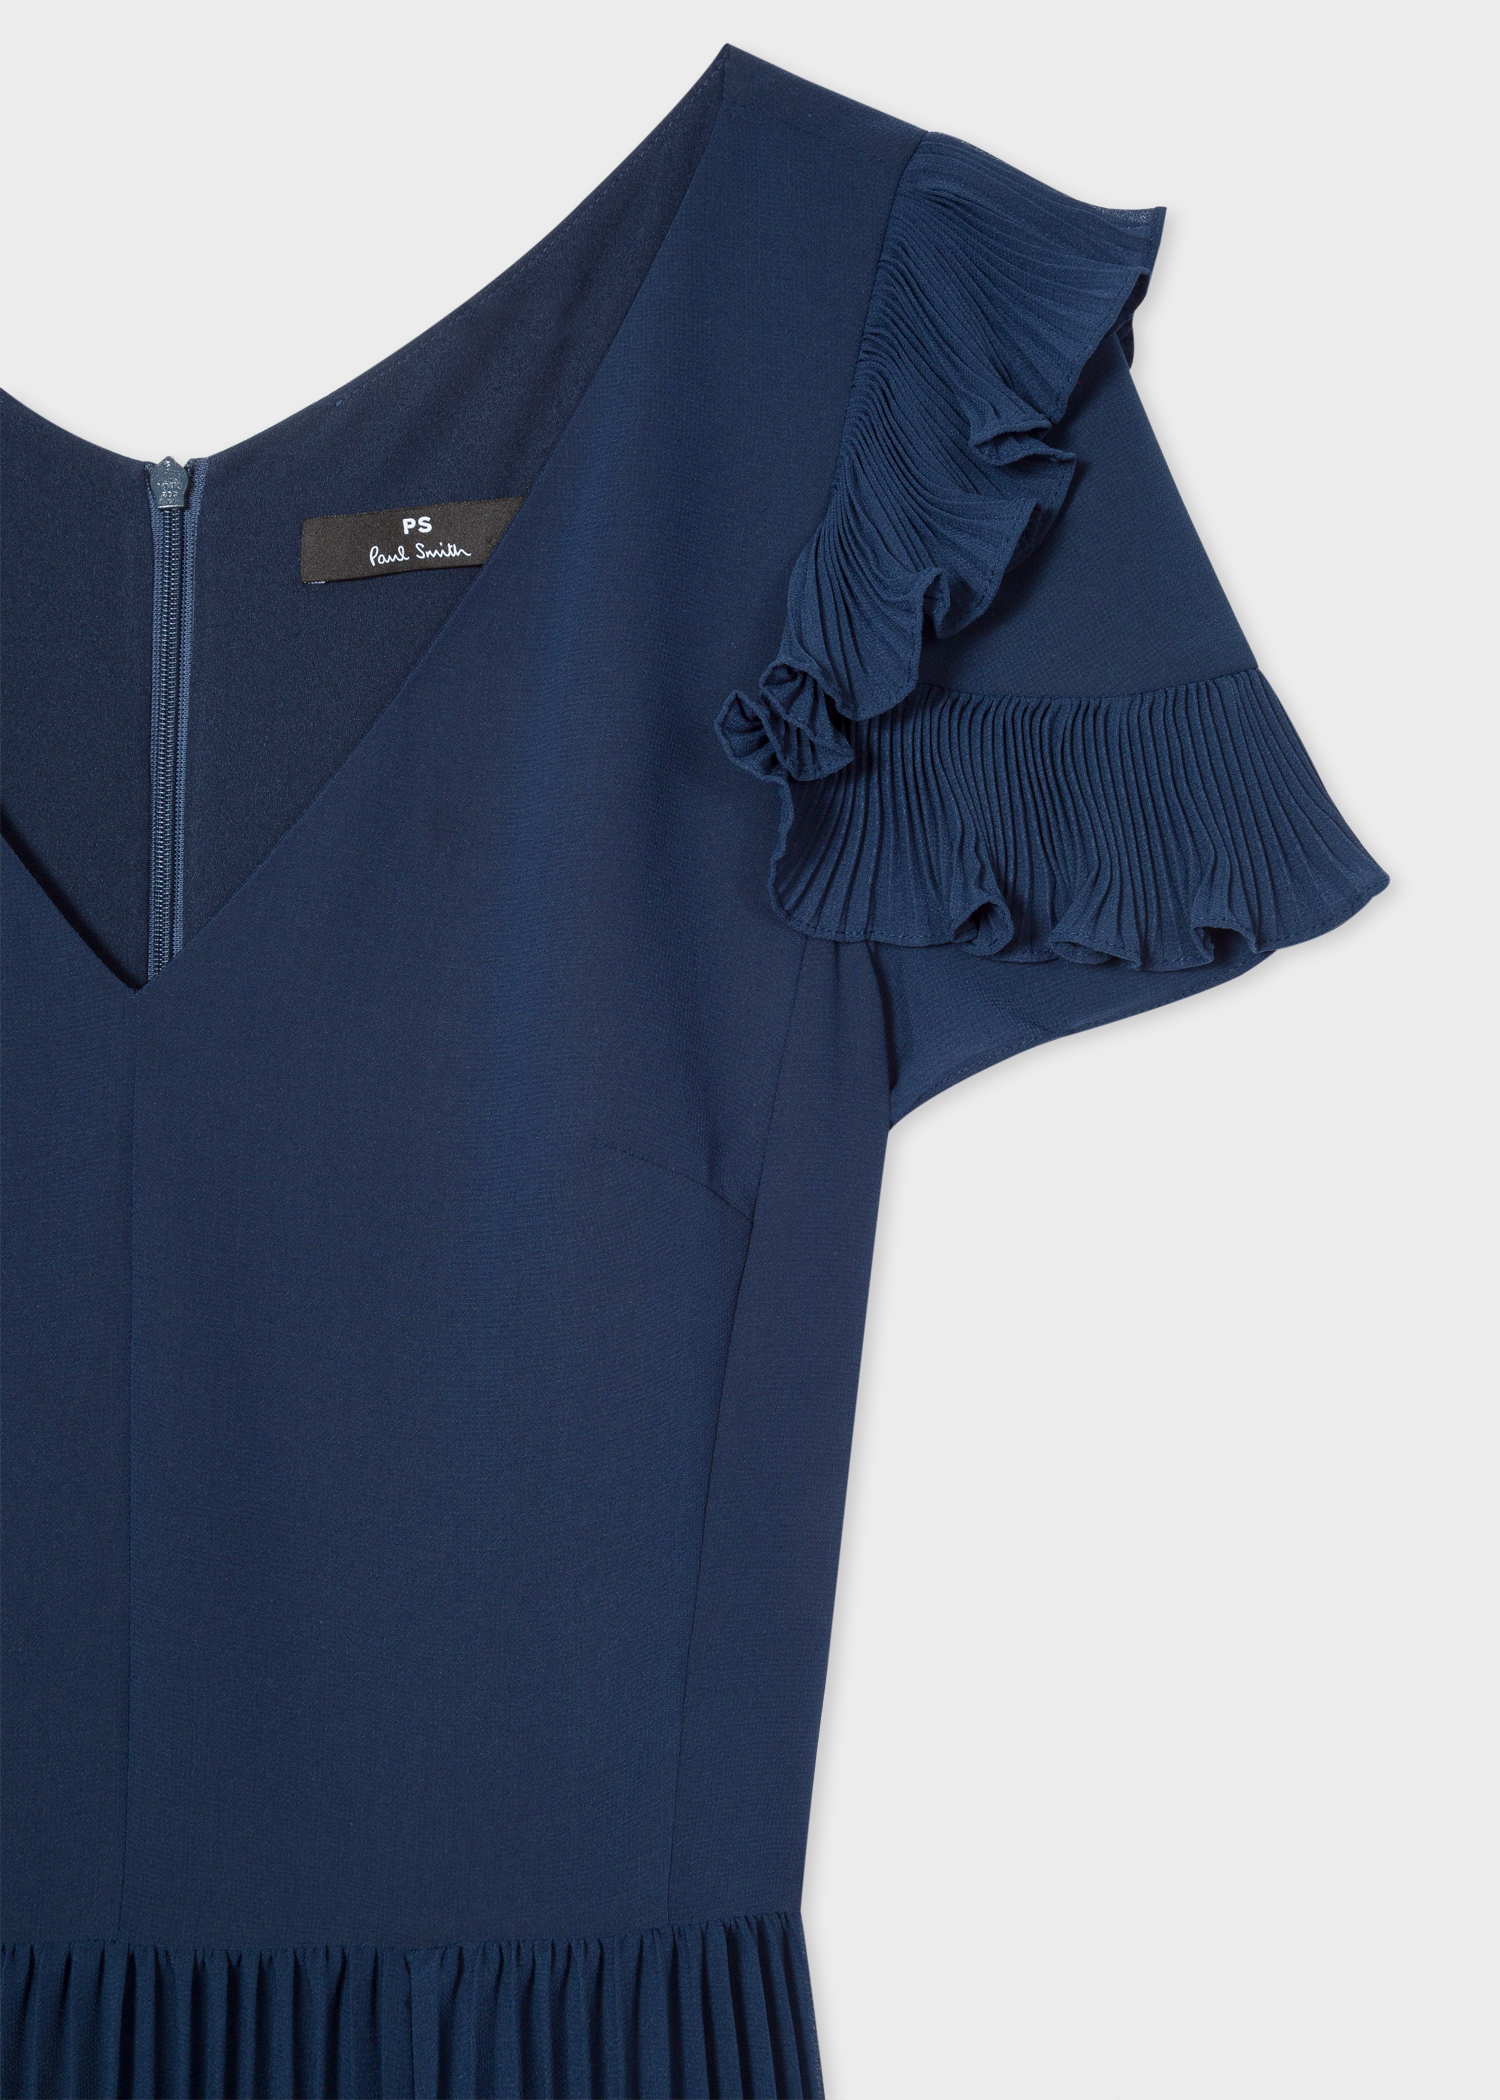 Sleeve view - Women's Navy Pleated Short Sleeve Midi Dress With Ruffle Details Paul Smith